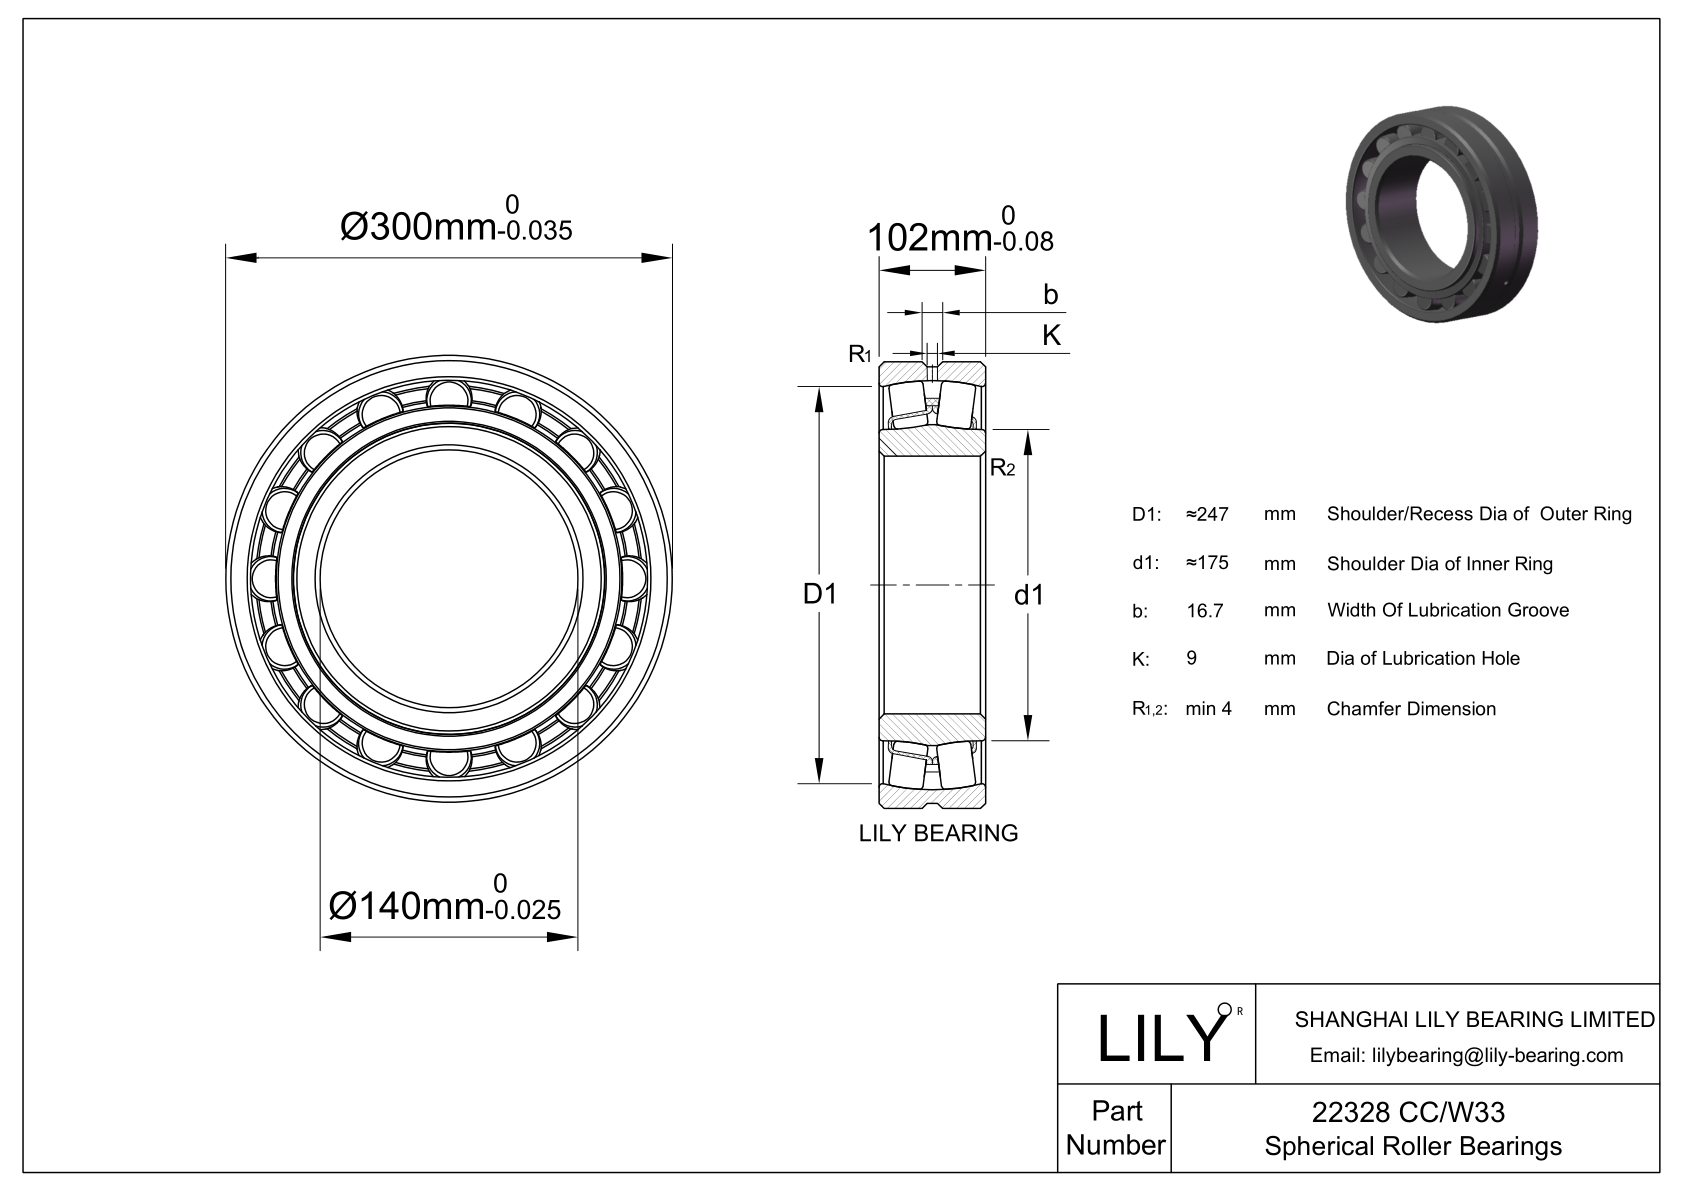 22328 CC/W33 Double Row Spherical Roller Bearing cad drawing